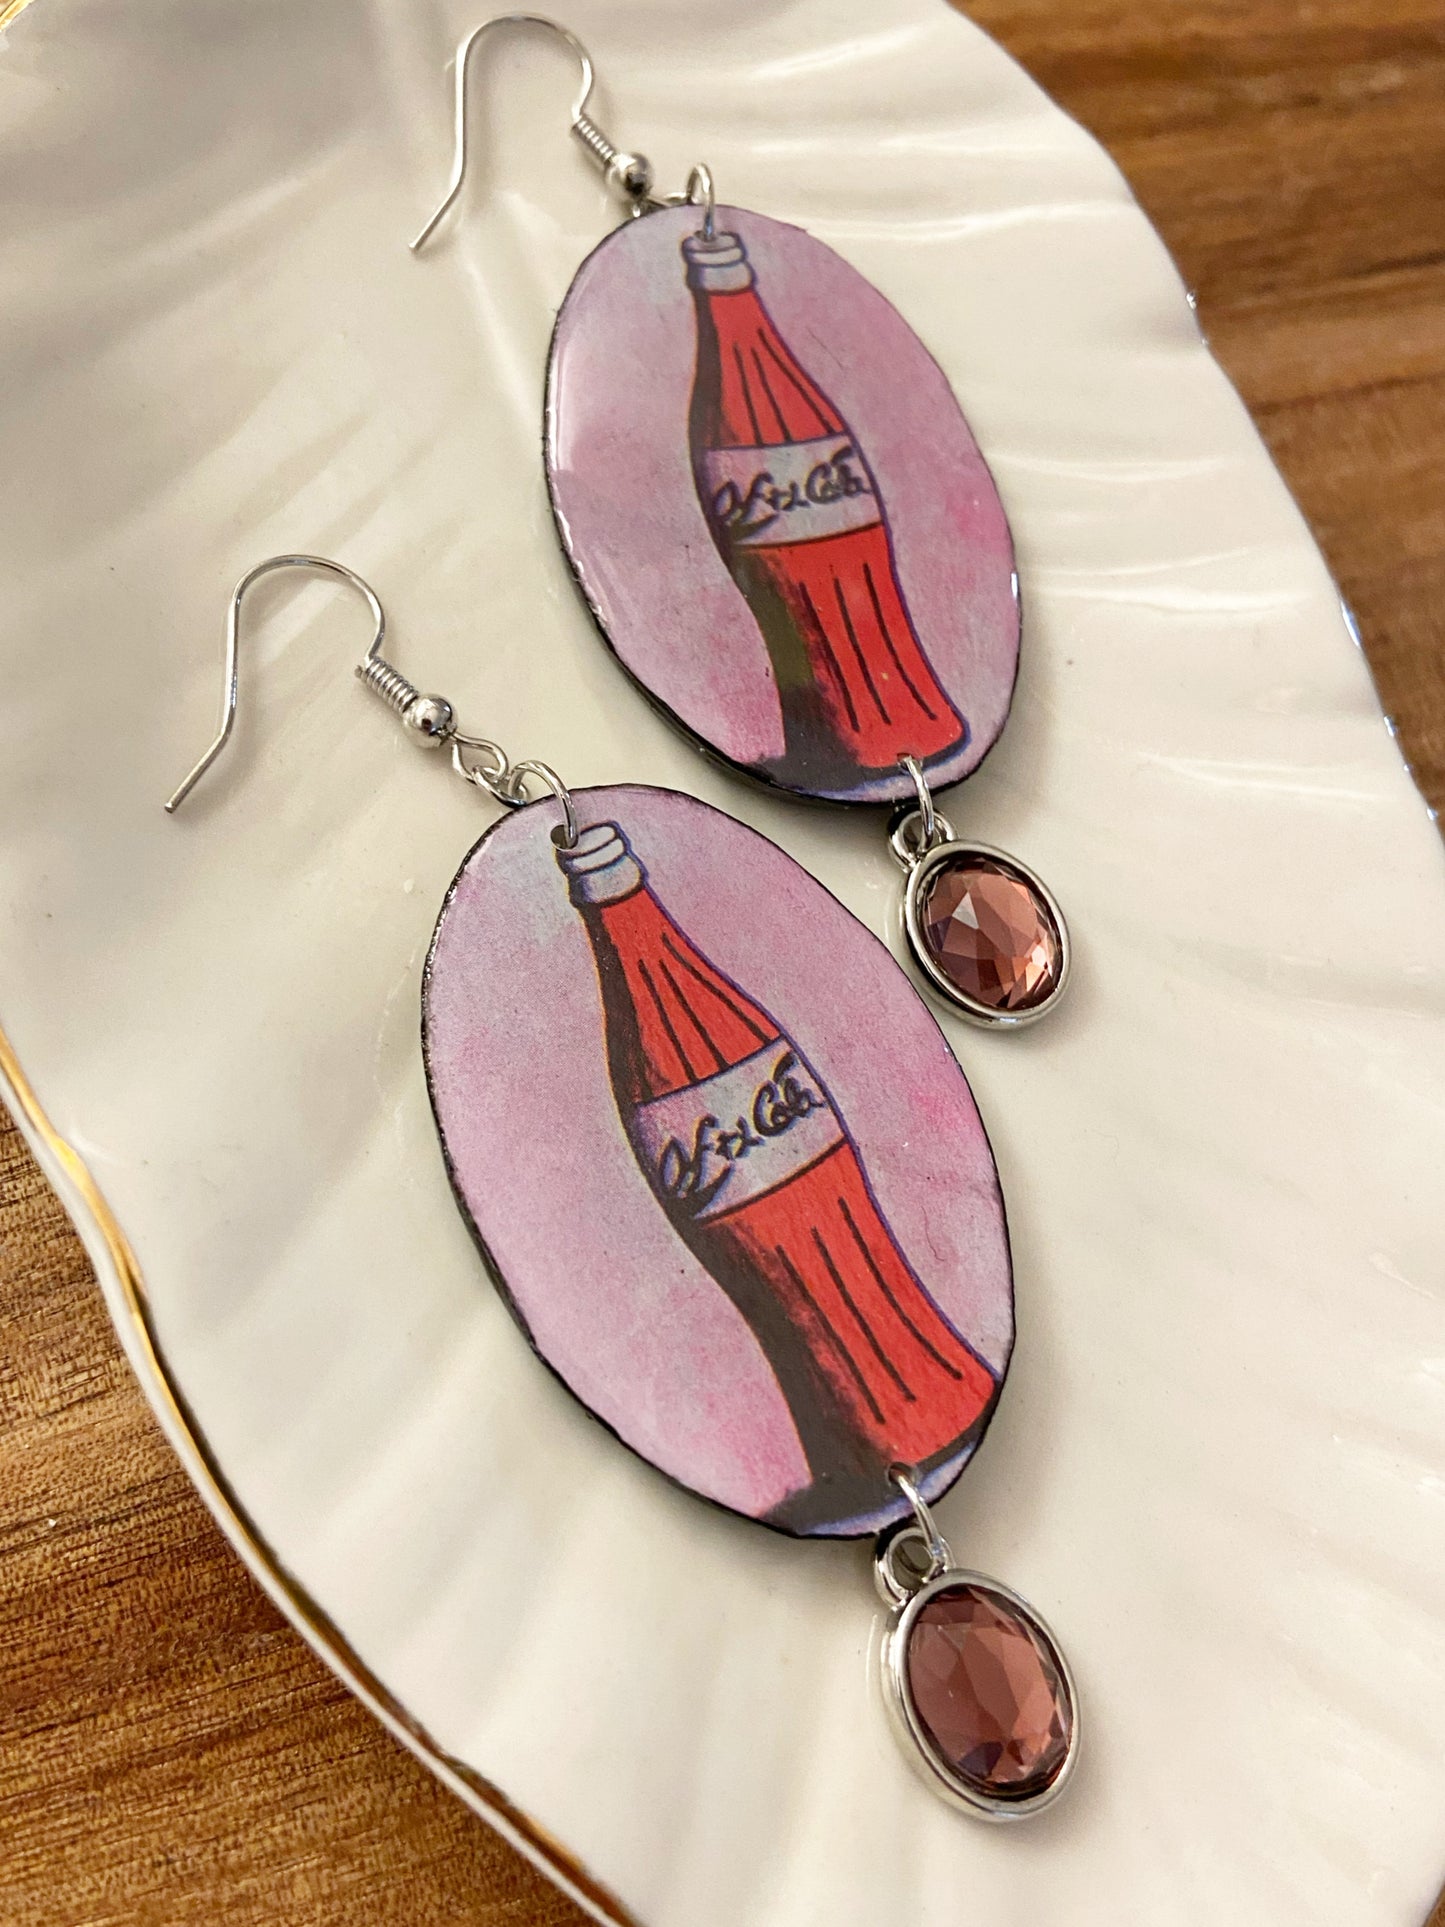 Loteria Cards- Upcycled paper "La Botella" oval statement earrings with burgundy glass bead dangle